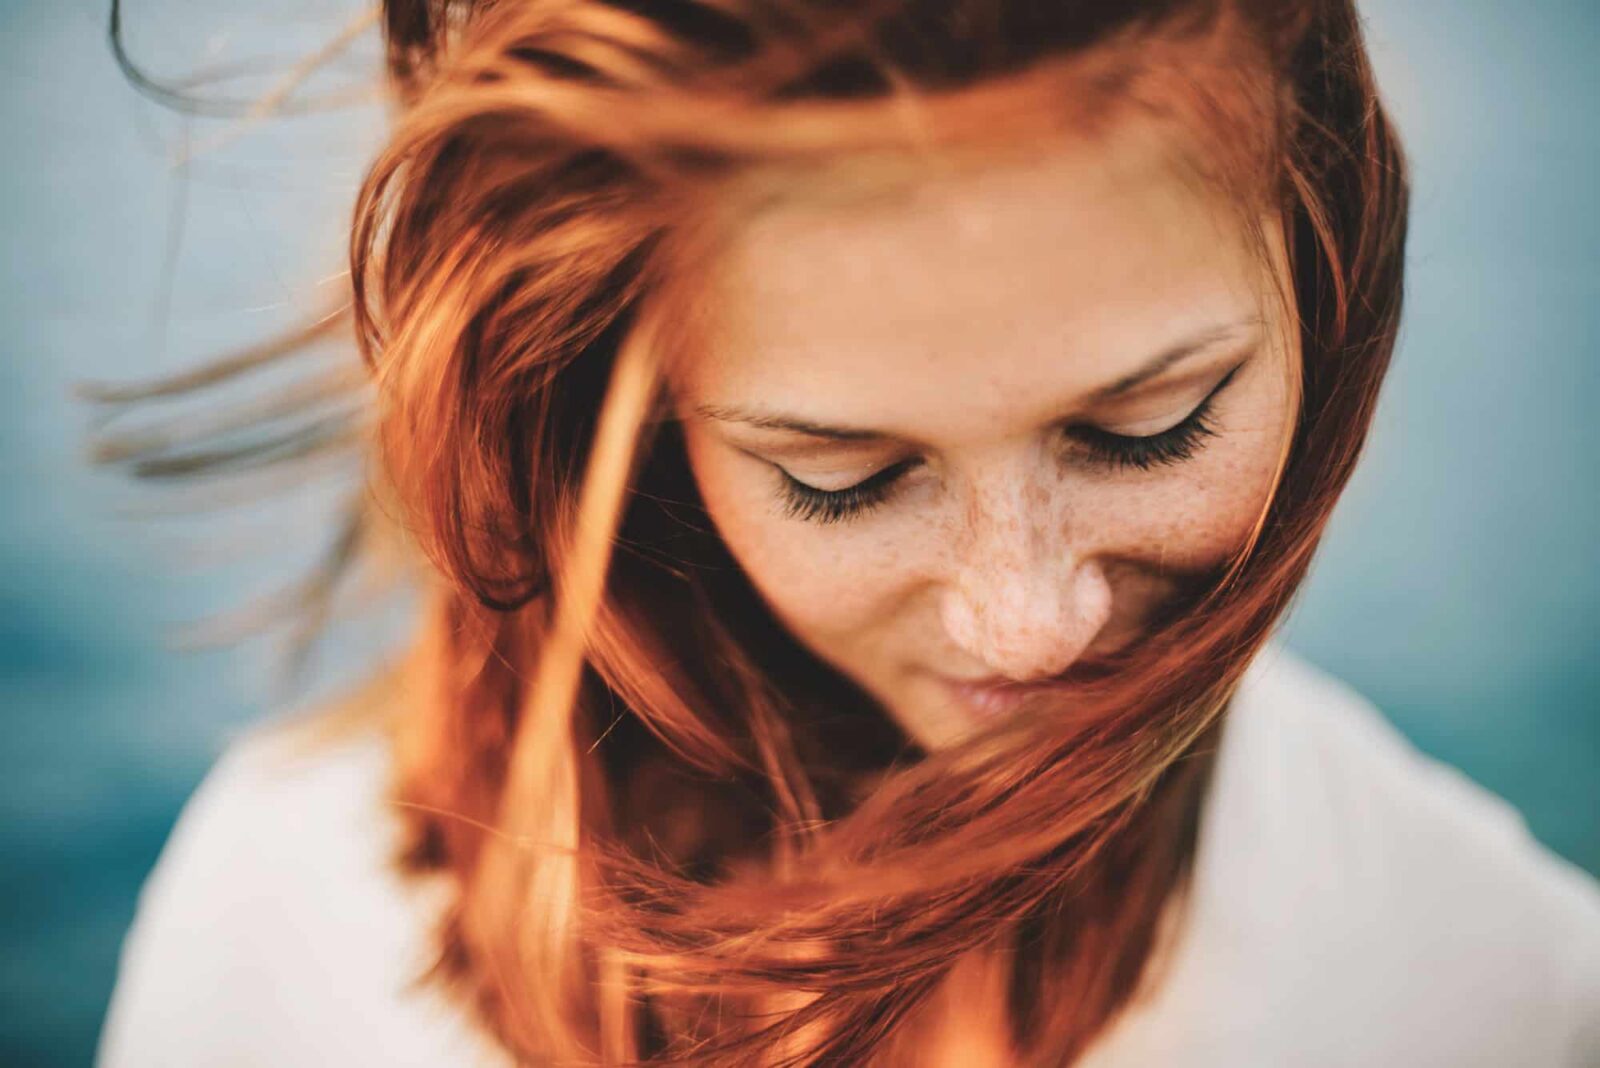 How Redheads Can Get Rid of Hairline Acne